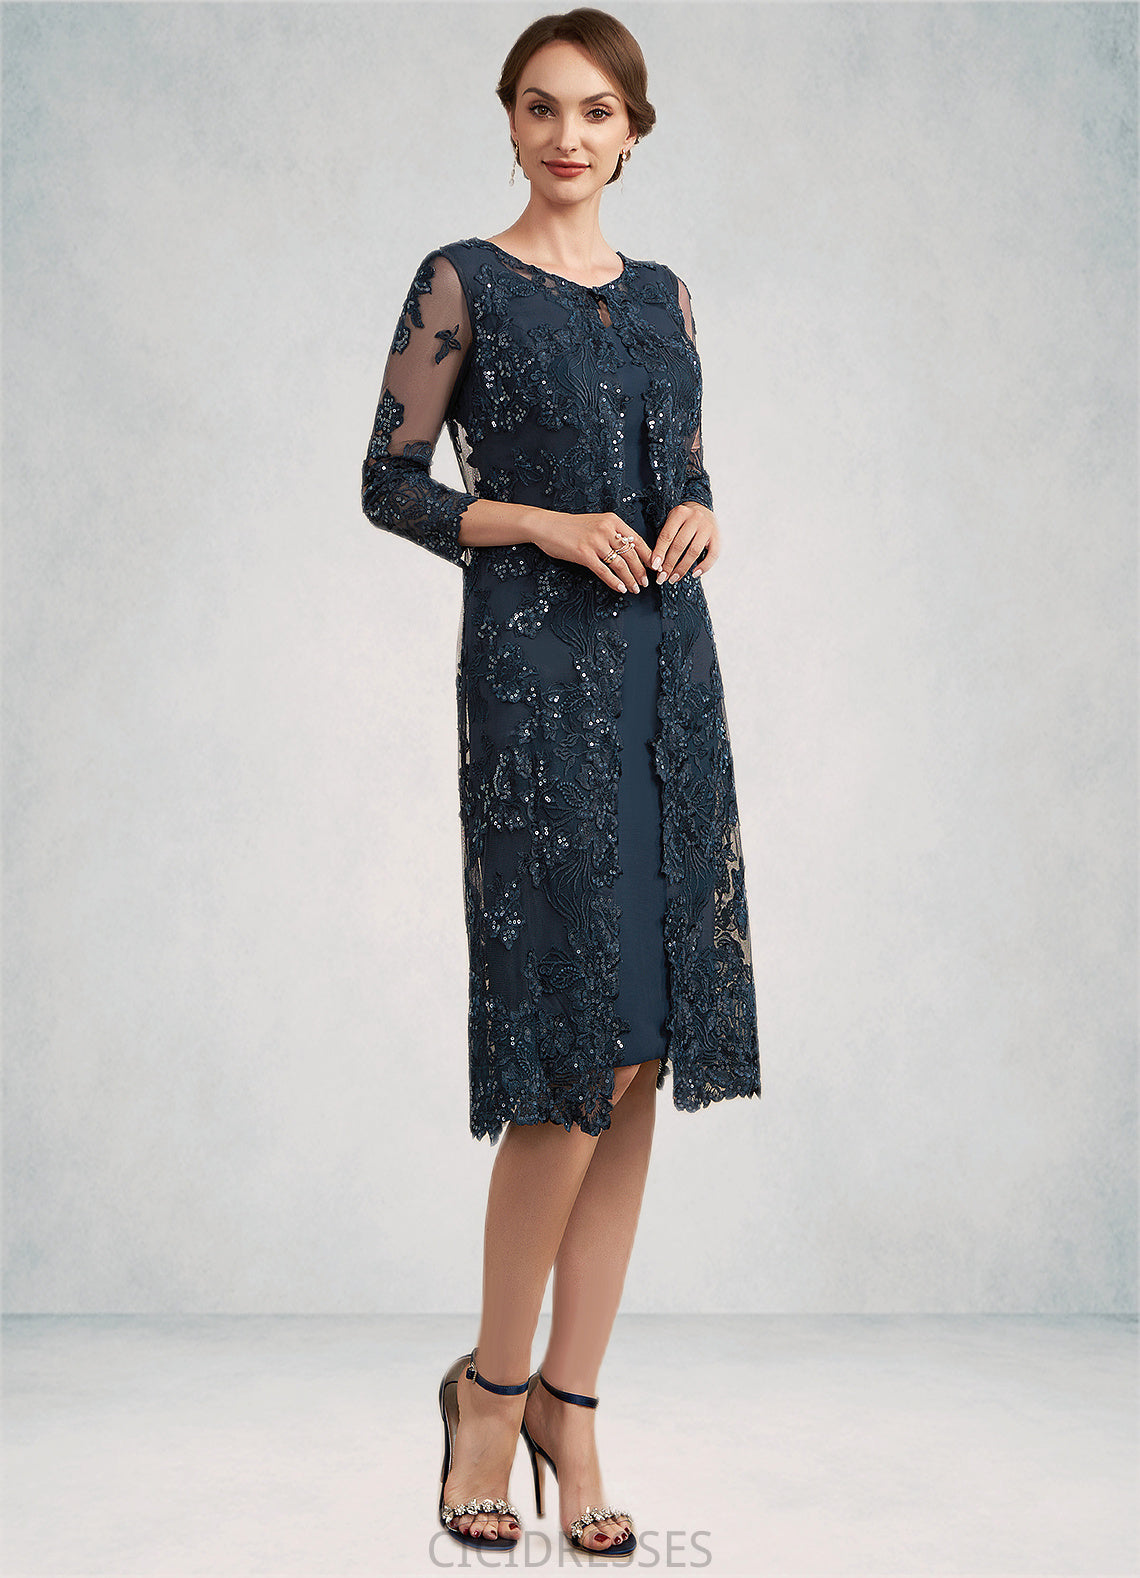 Tianna Sheath/Column Scoop Neck Knee-Length Chiffon Lace Mother of the Bride Dress With Sequins CIC8126P0014771